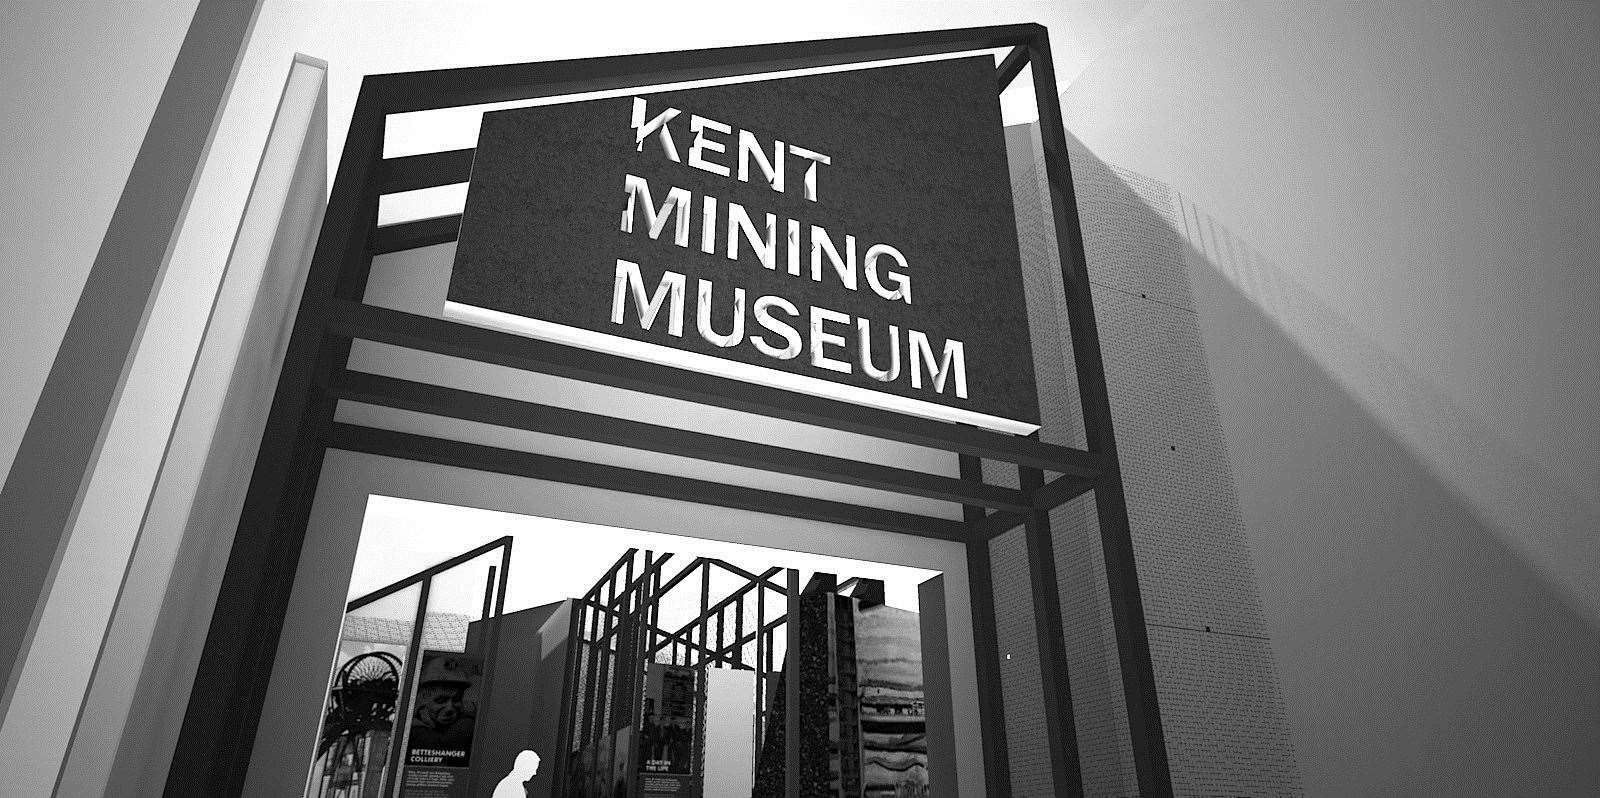 Kent Mining Museum opens this Saturday